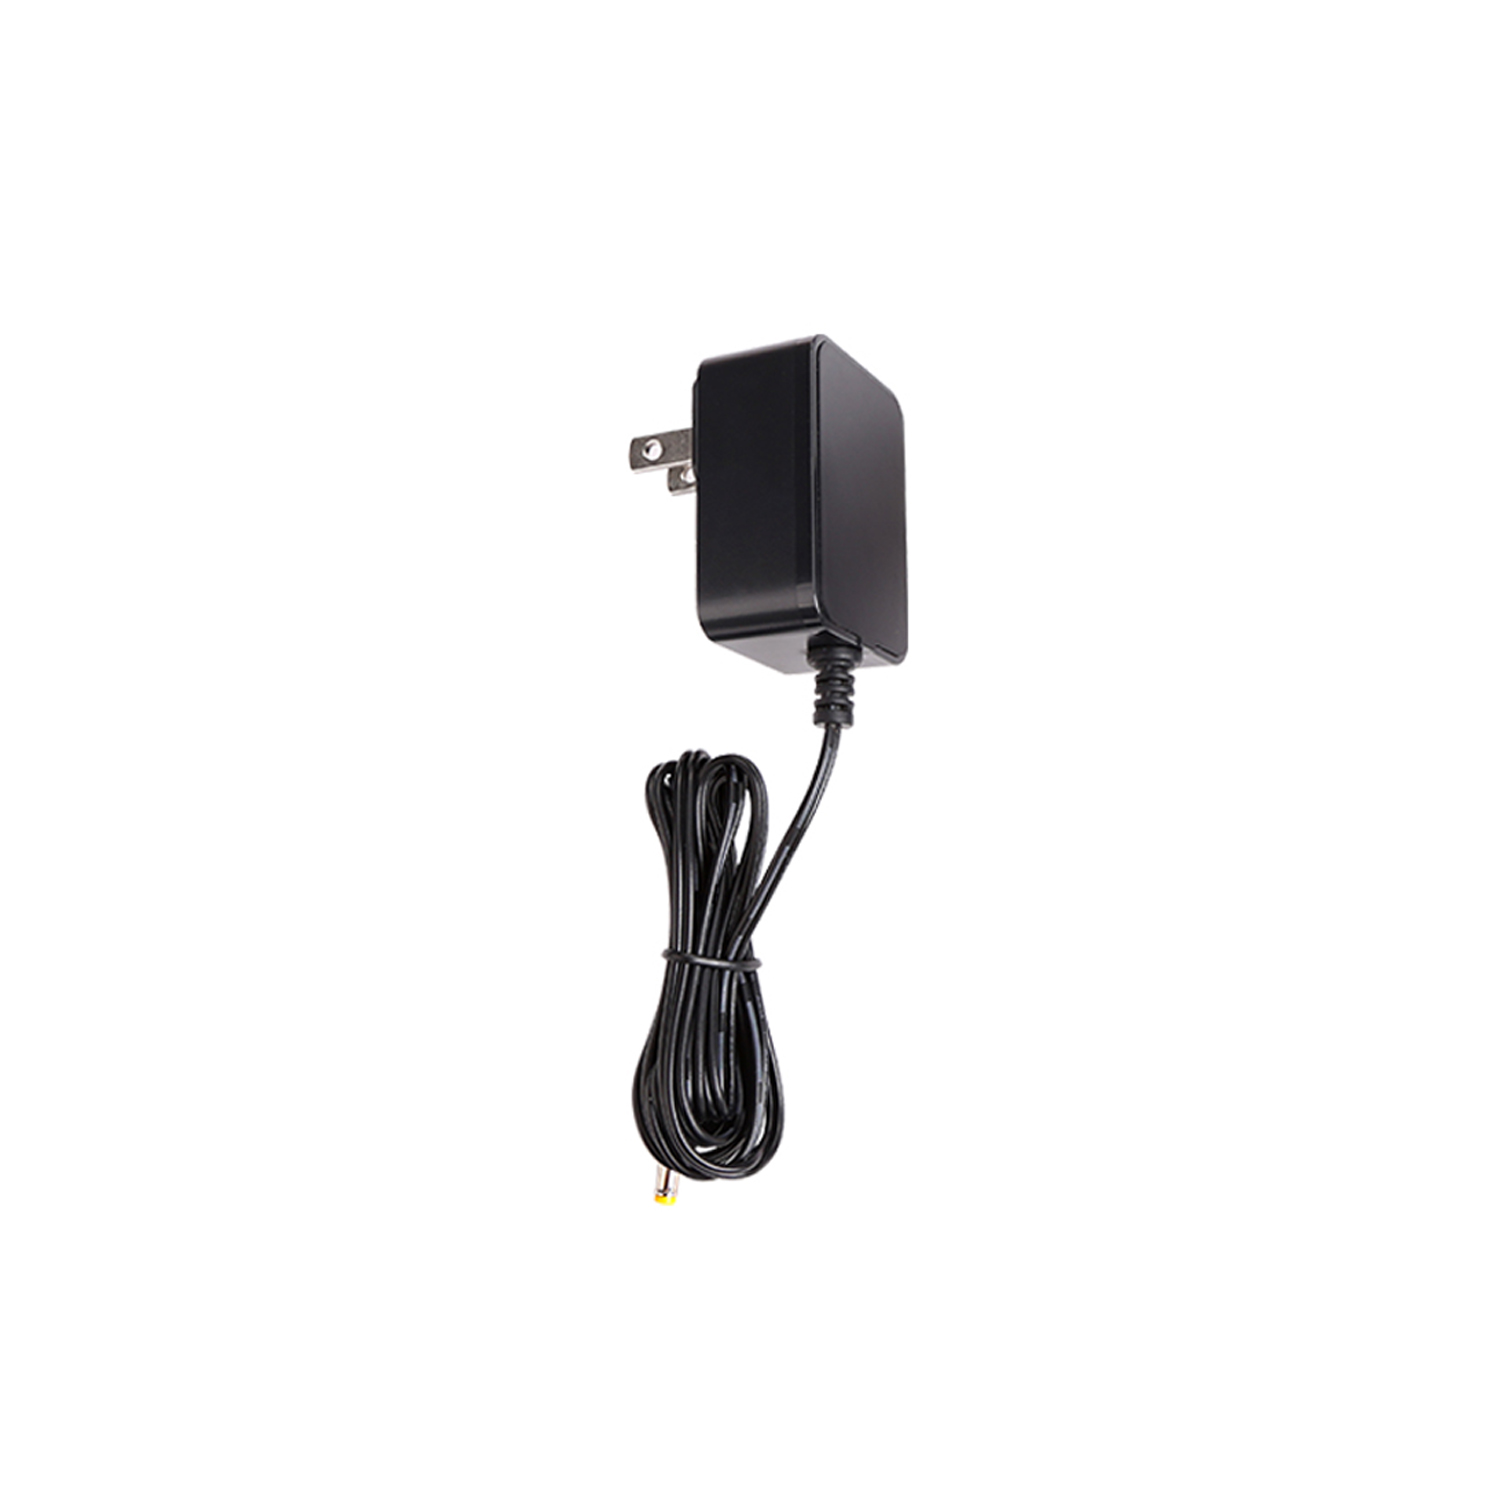 DC 12V 1A 10 FT Power Supply Adapter for Cromorc Security Camera System